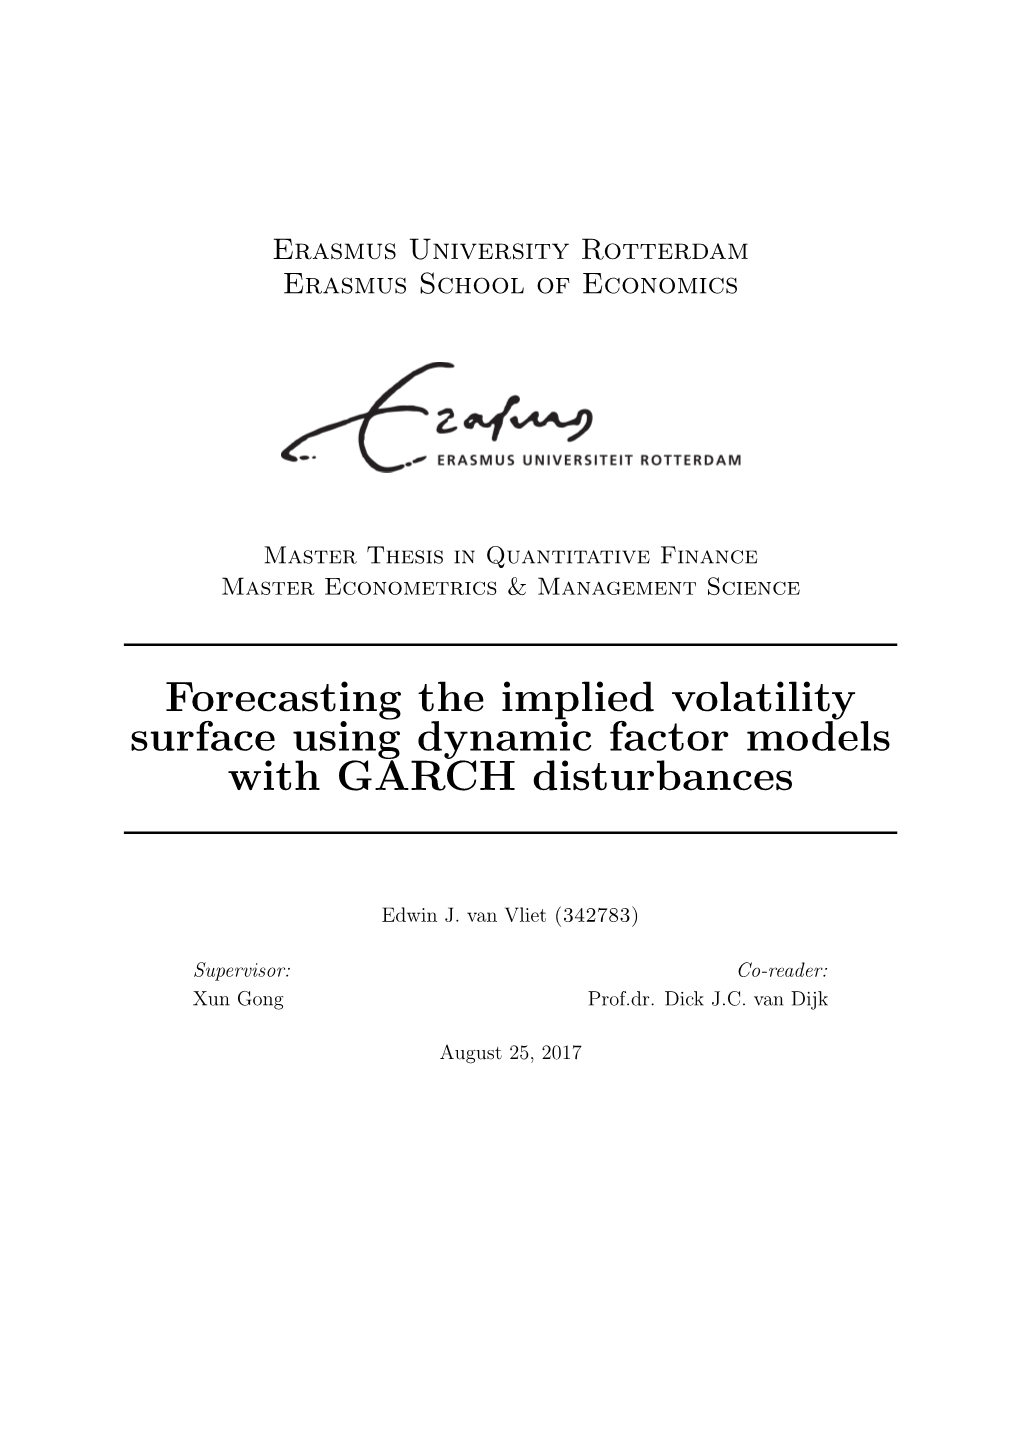 Forecasting the Implied Volatility Surface Using Dynamic Factor Models with GARCH Disturbances